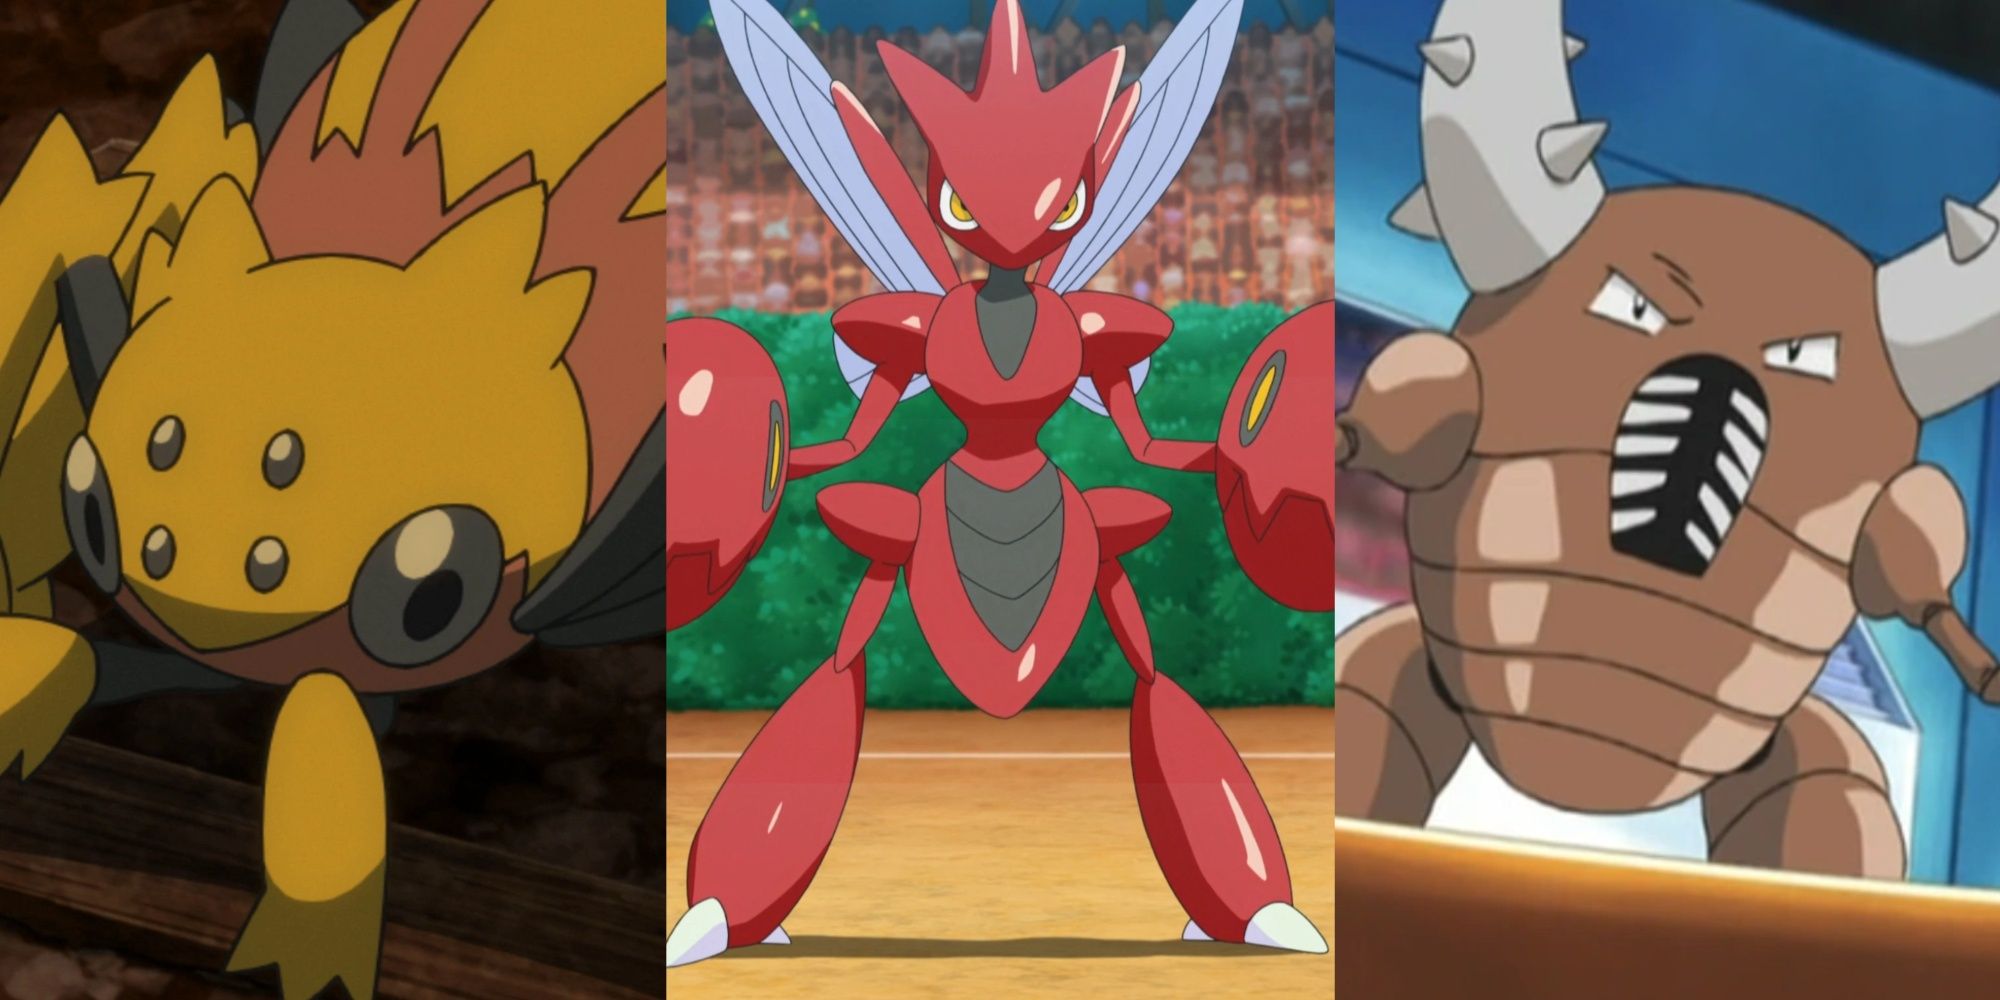 Featuring Galvantula, Scizor, and Pinsir from the Anime